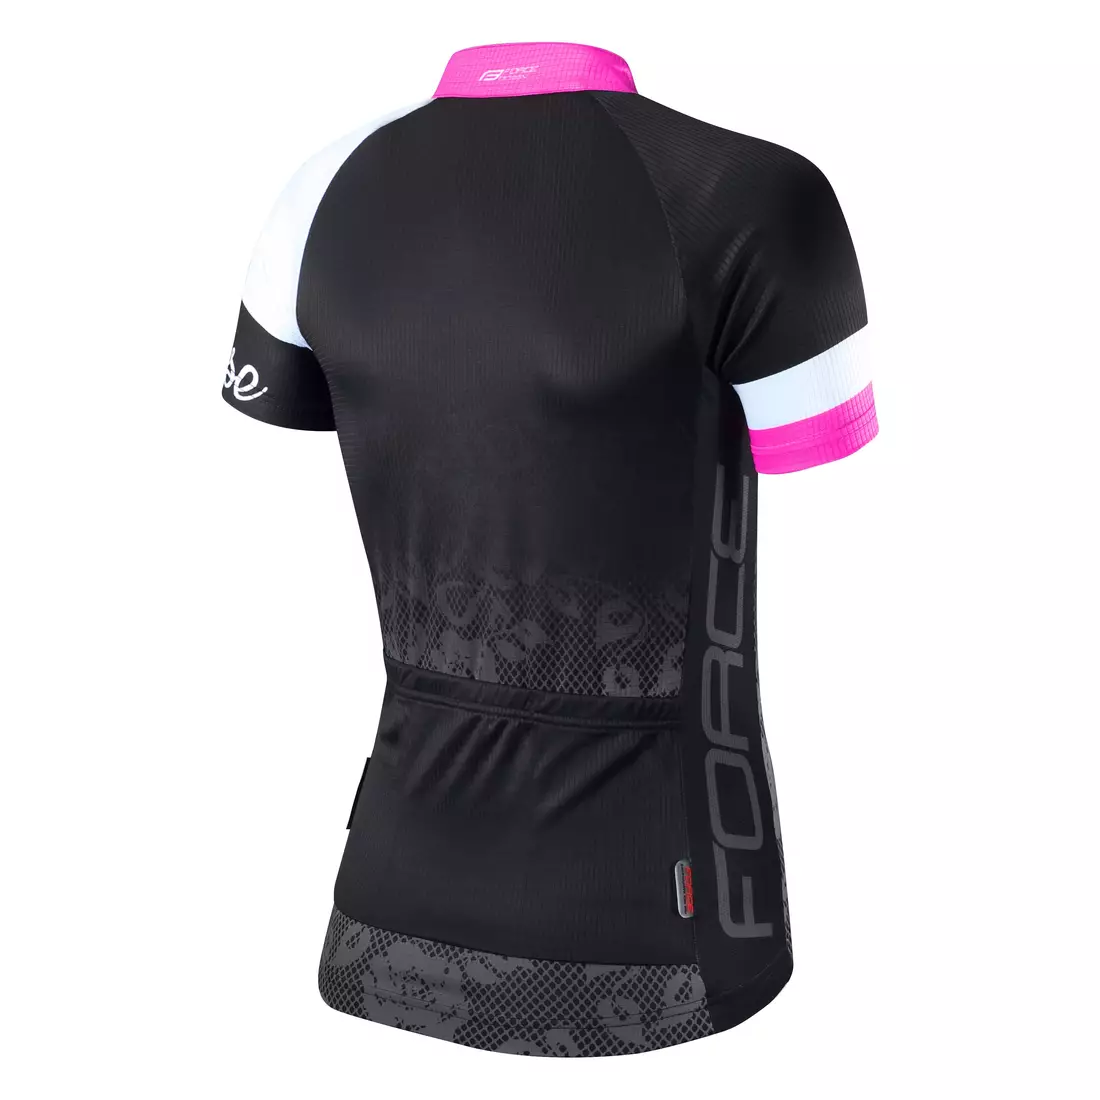 FORCE ROSE women's cycling jersey 9001342 black and pink